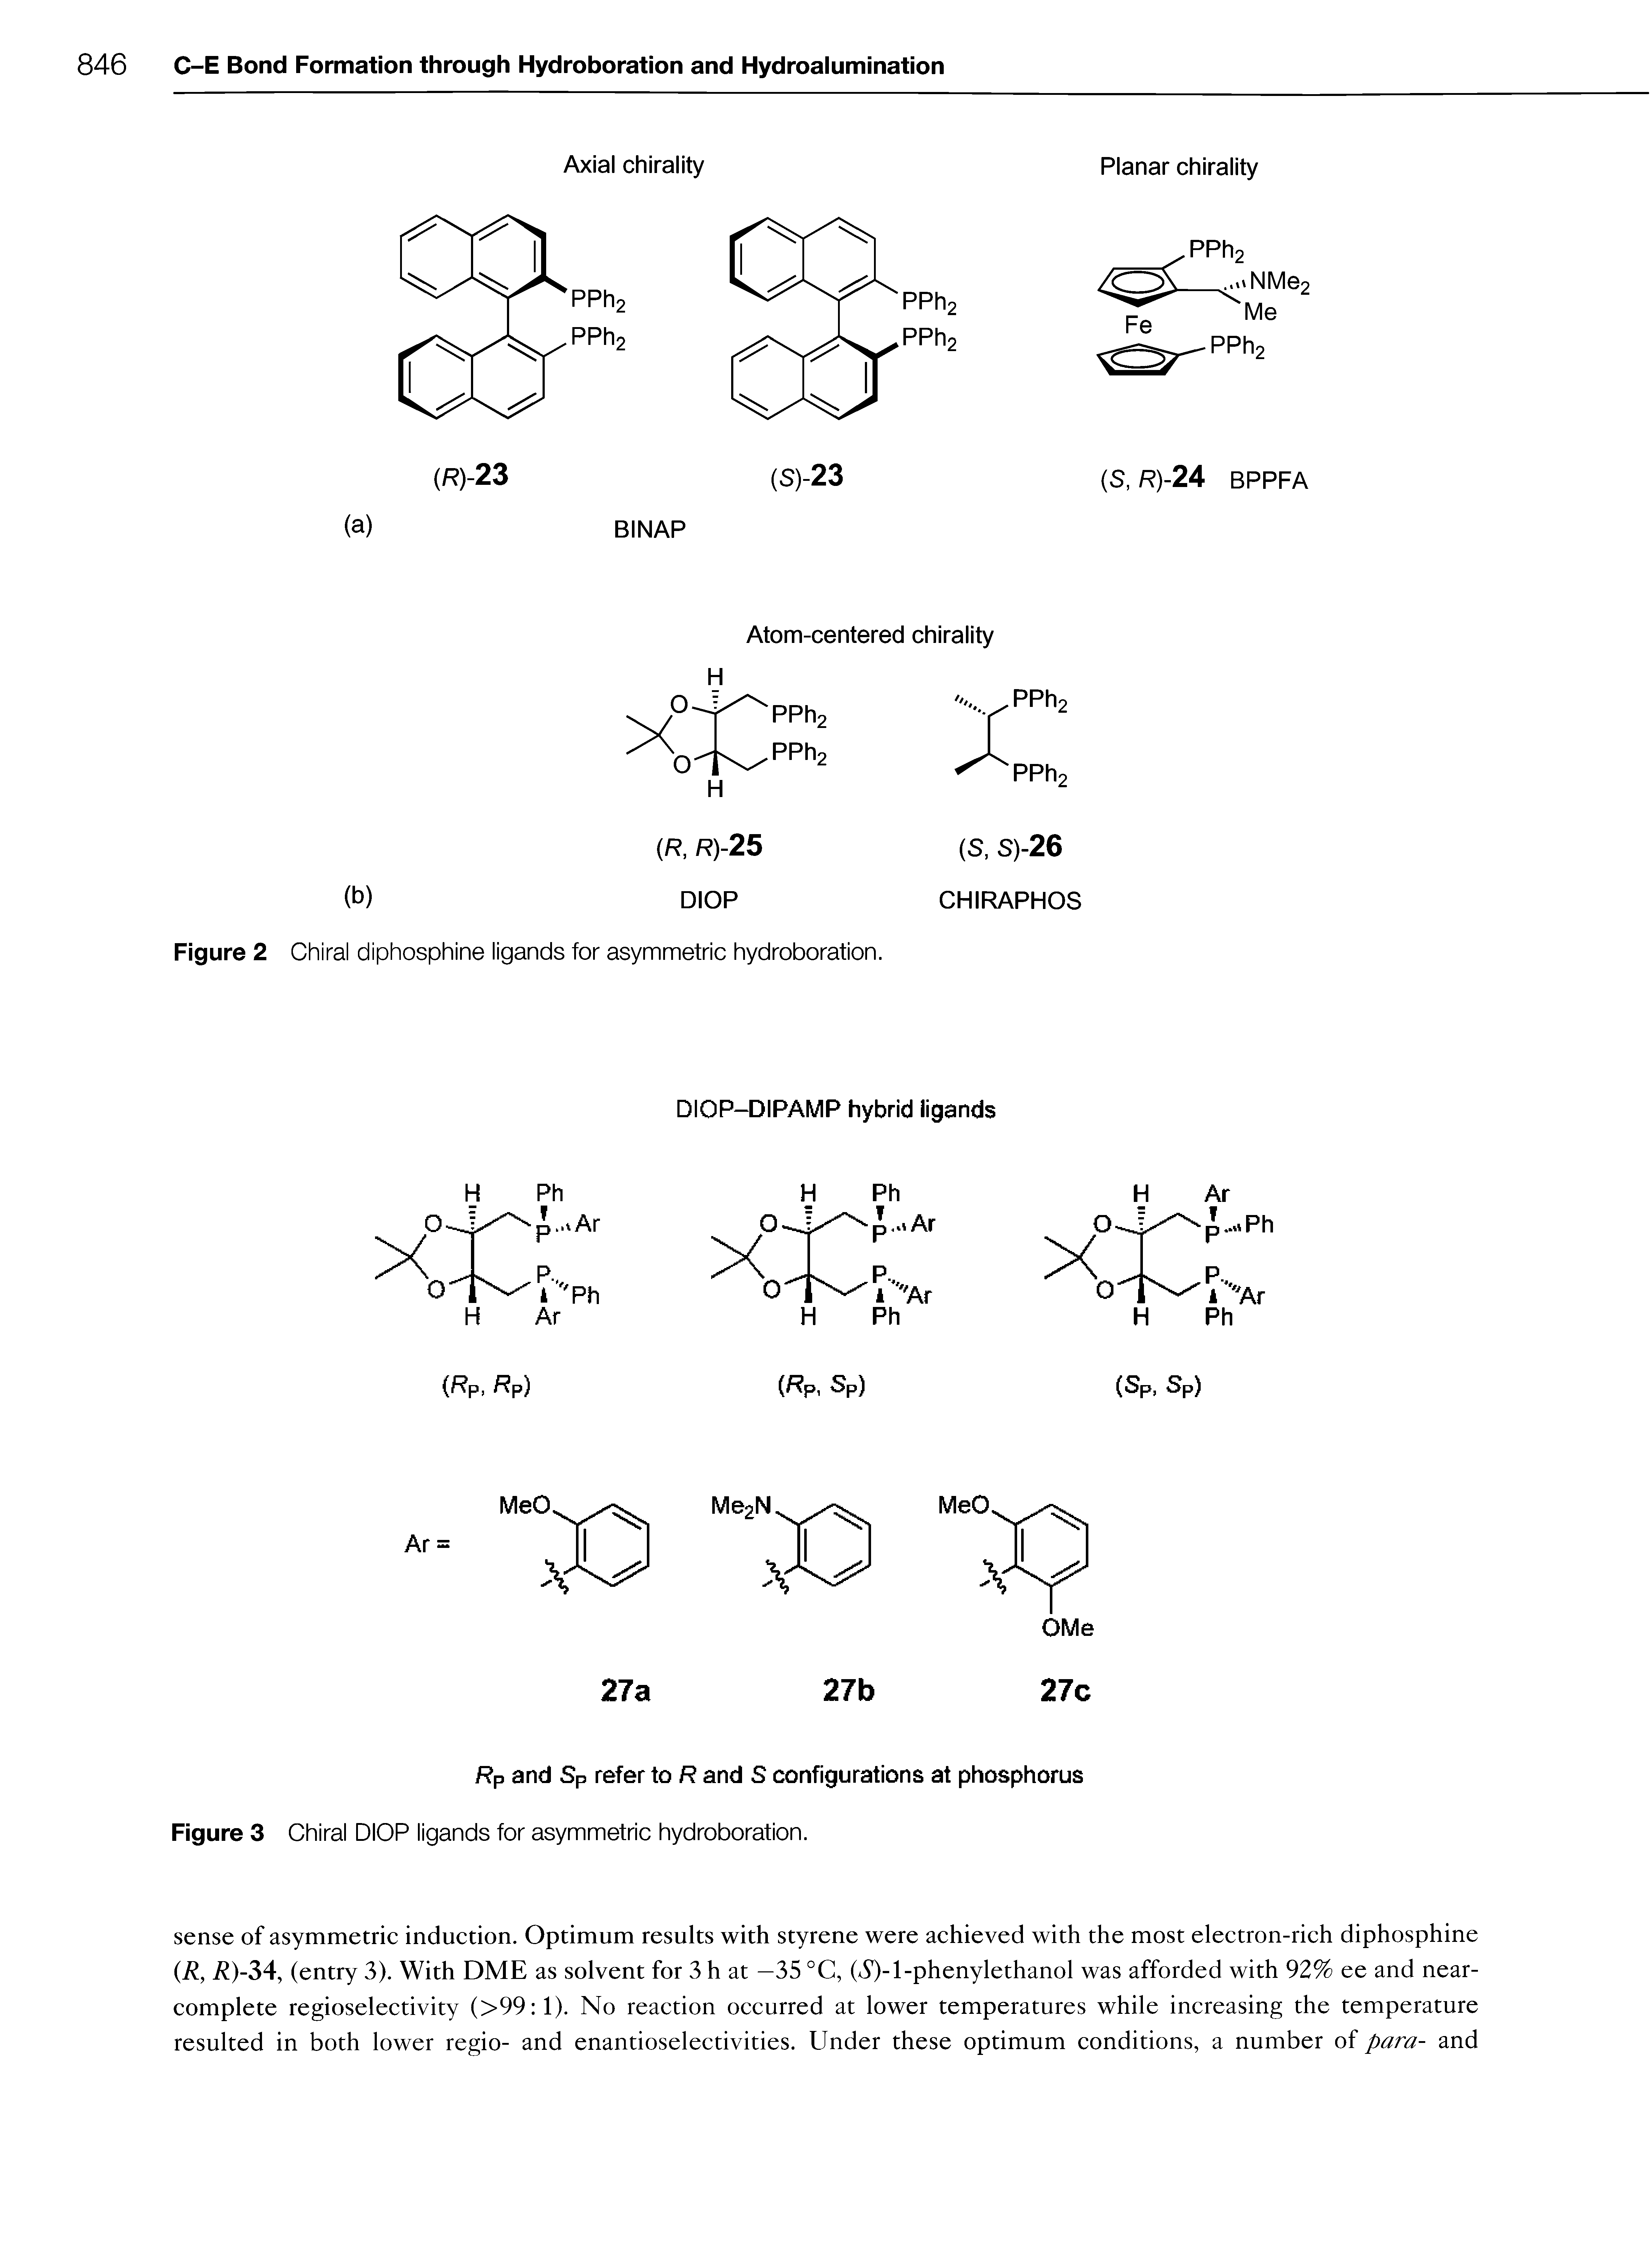 Figure 2 Chiral diphosphine ligands for asymmetric hydroboration.